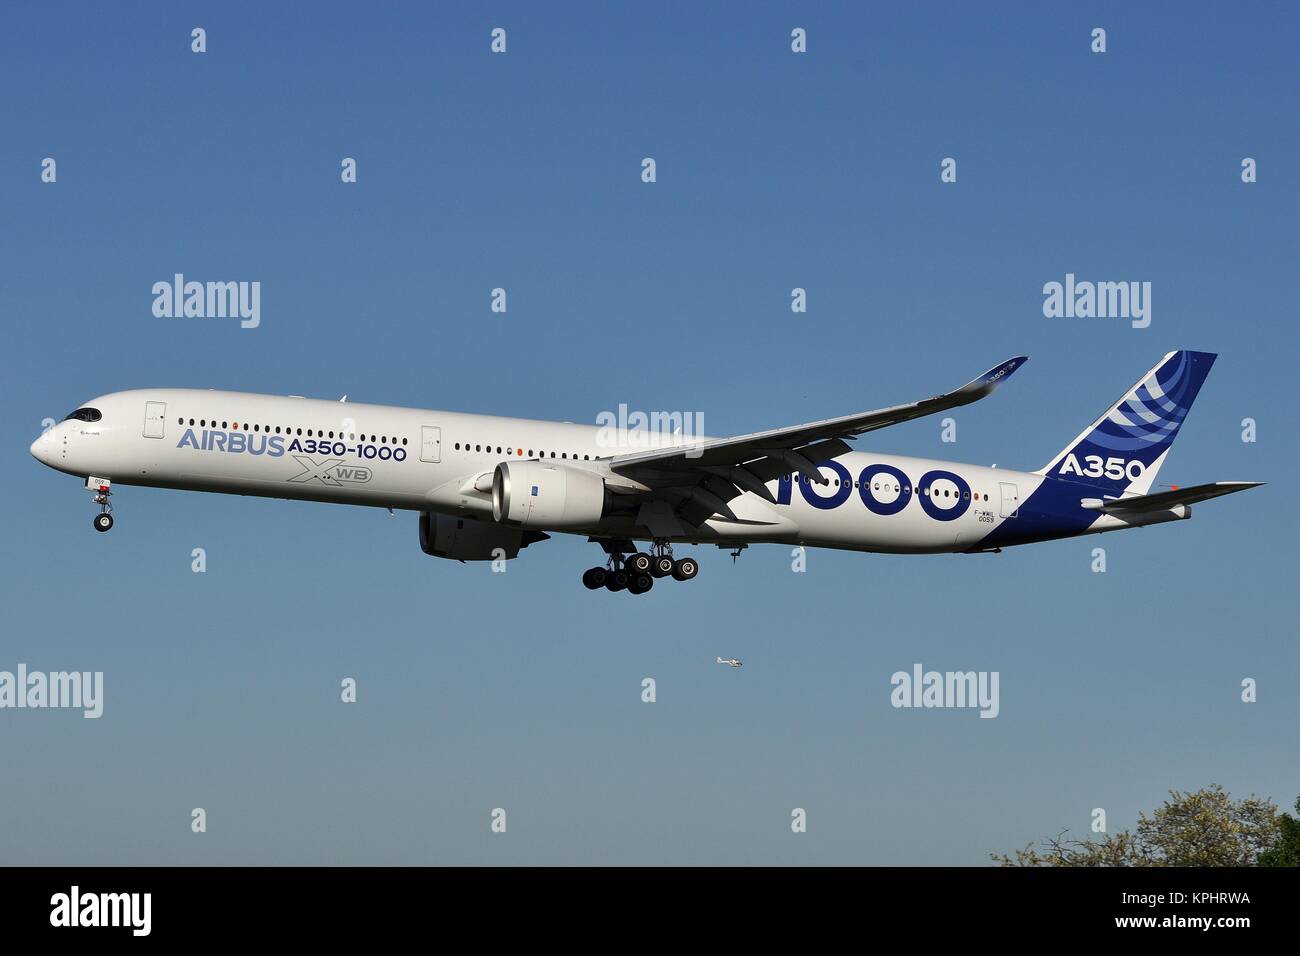 AIRBUS A350-1000 F-WMIL ABOUT TO LAND AT TOULOUSE AFTER A TEST FLIGHT. Stock Photo